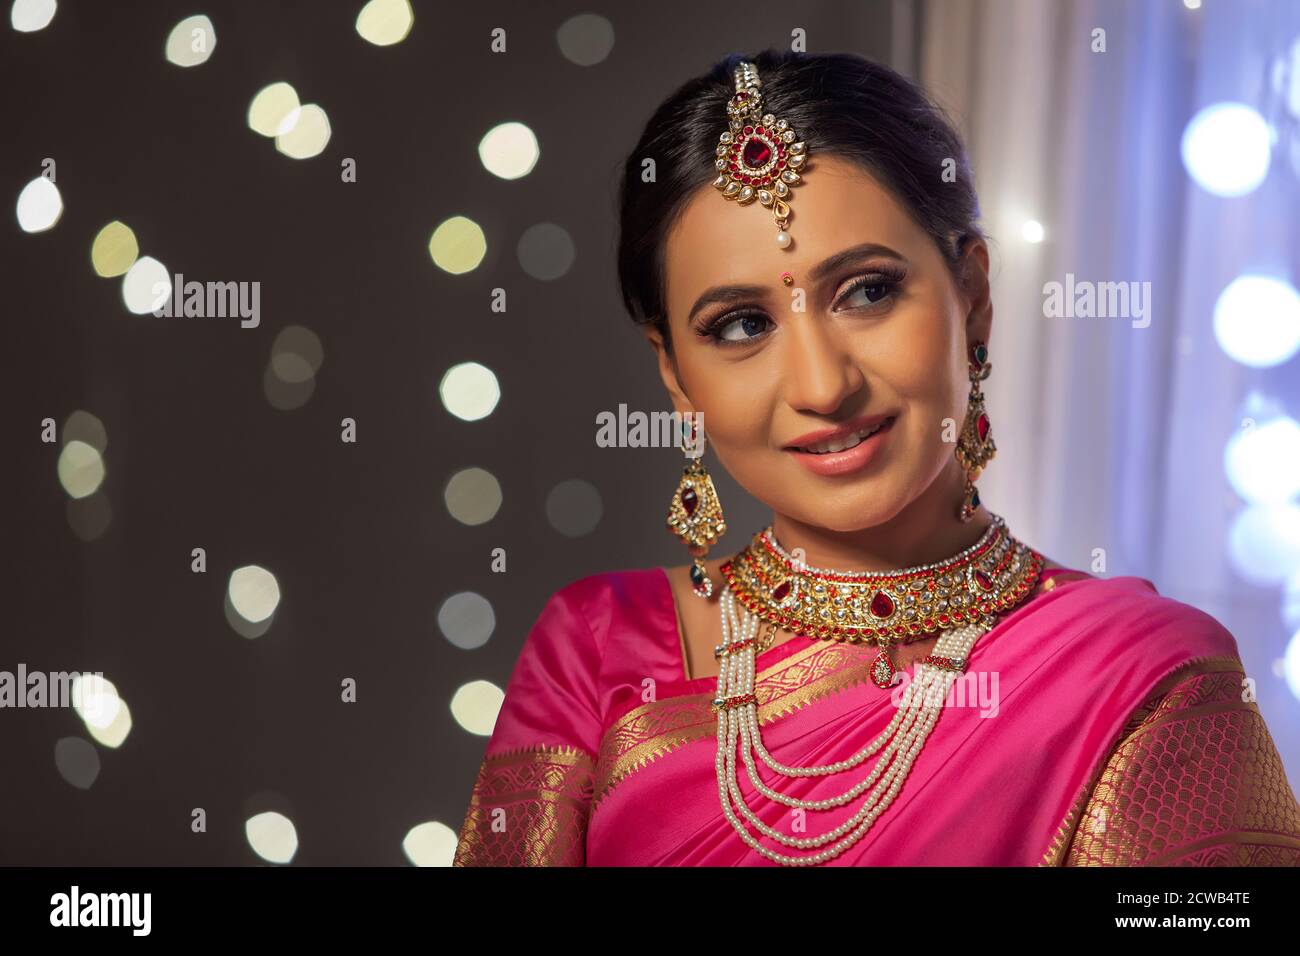 Woman in a pink saree looking sideways with a smile on her face Stock Photo